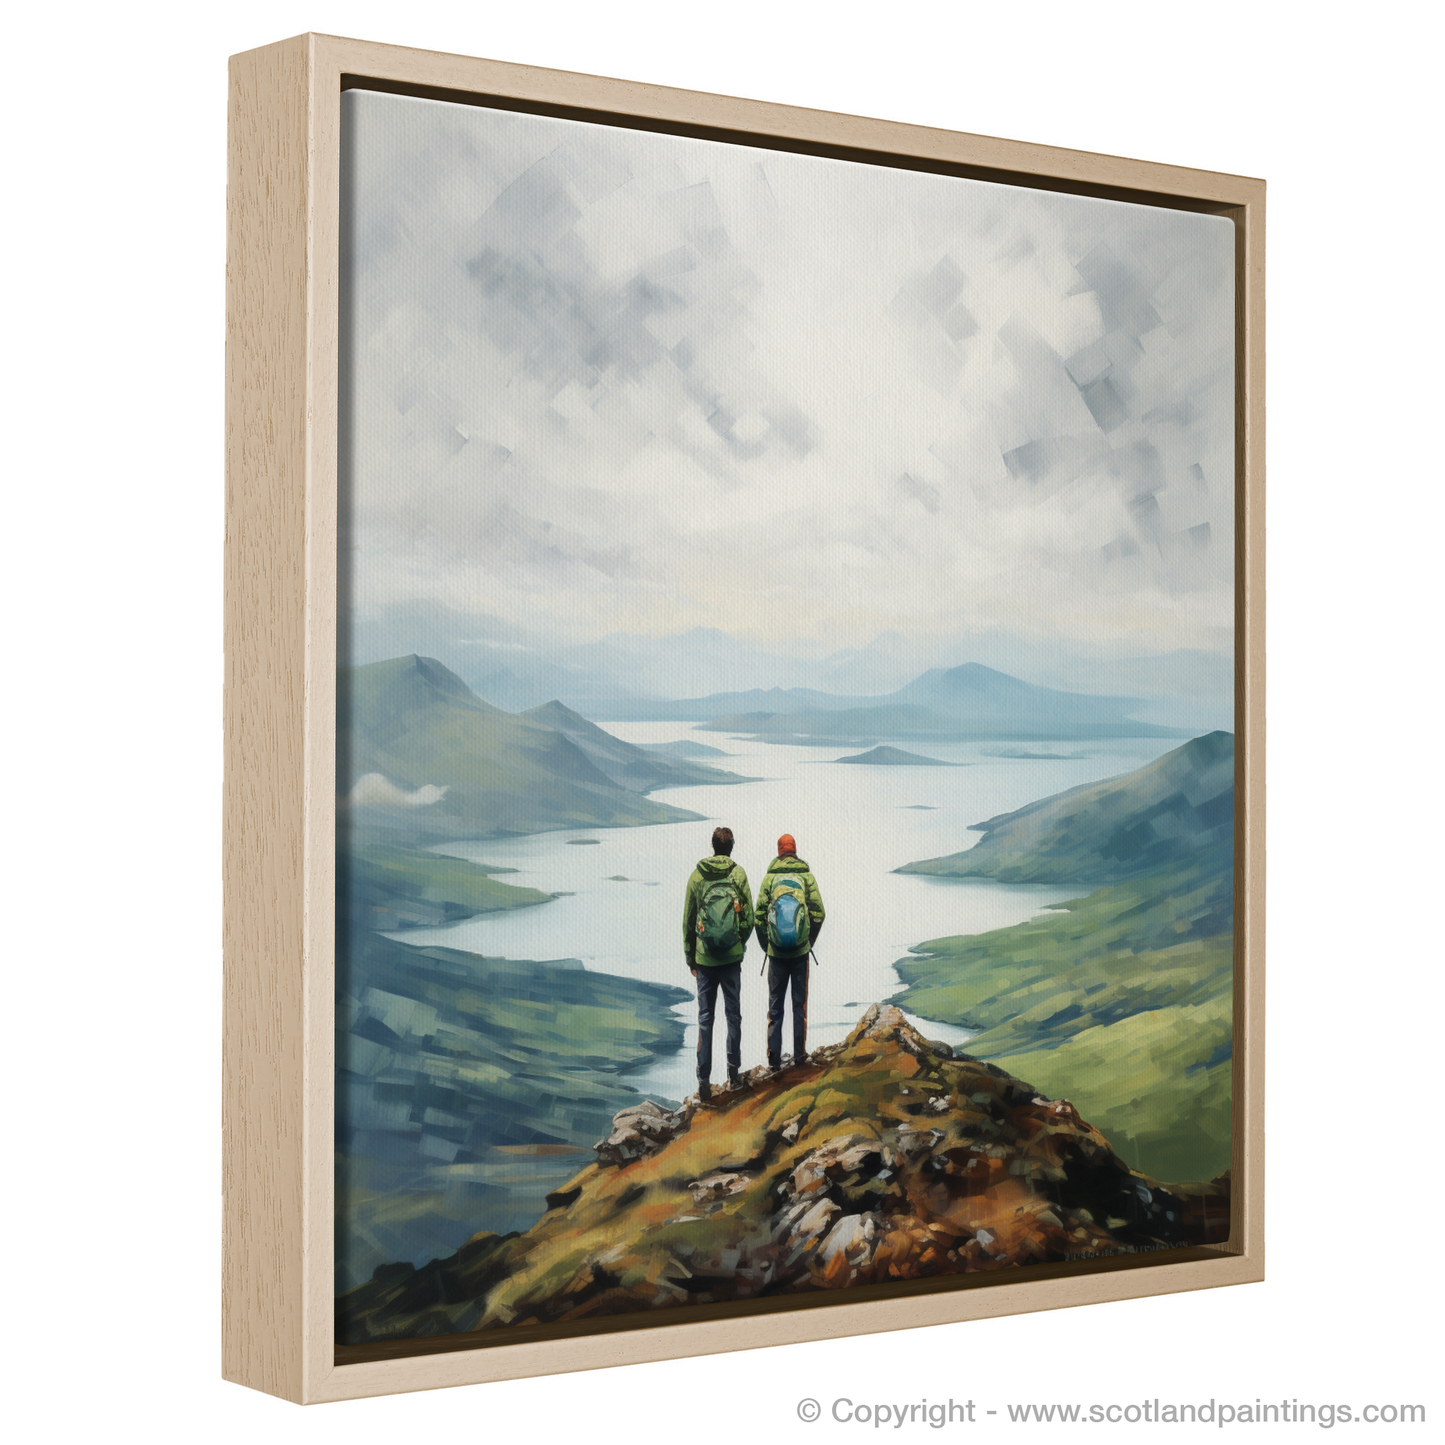 Painting and Art Print of Two hikers looking out on Loch Lomond entitled "Highland Companions: Contemplation at Loch Lomond".